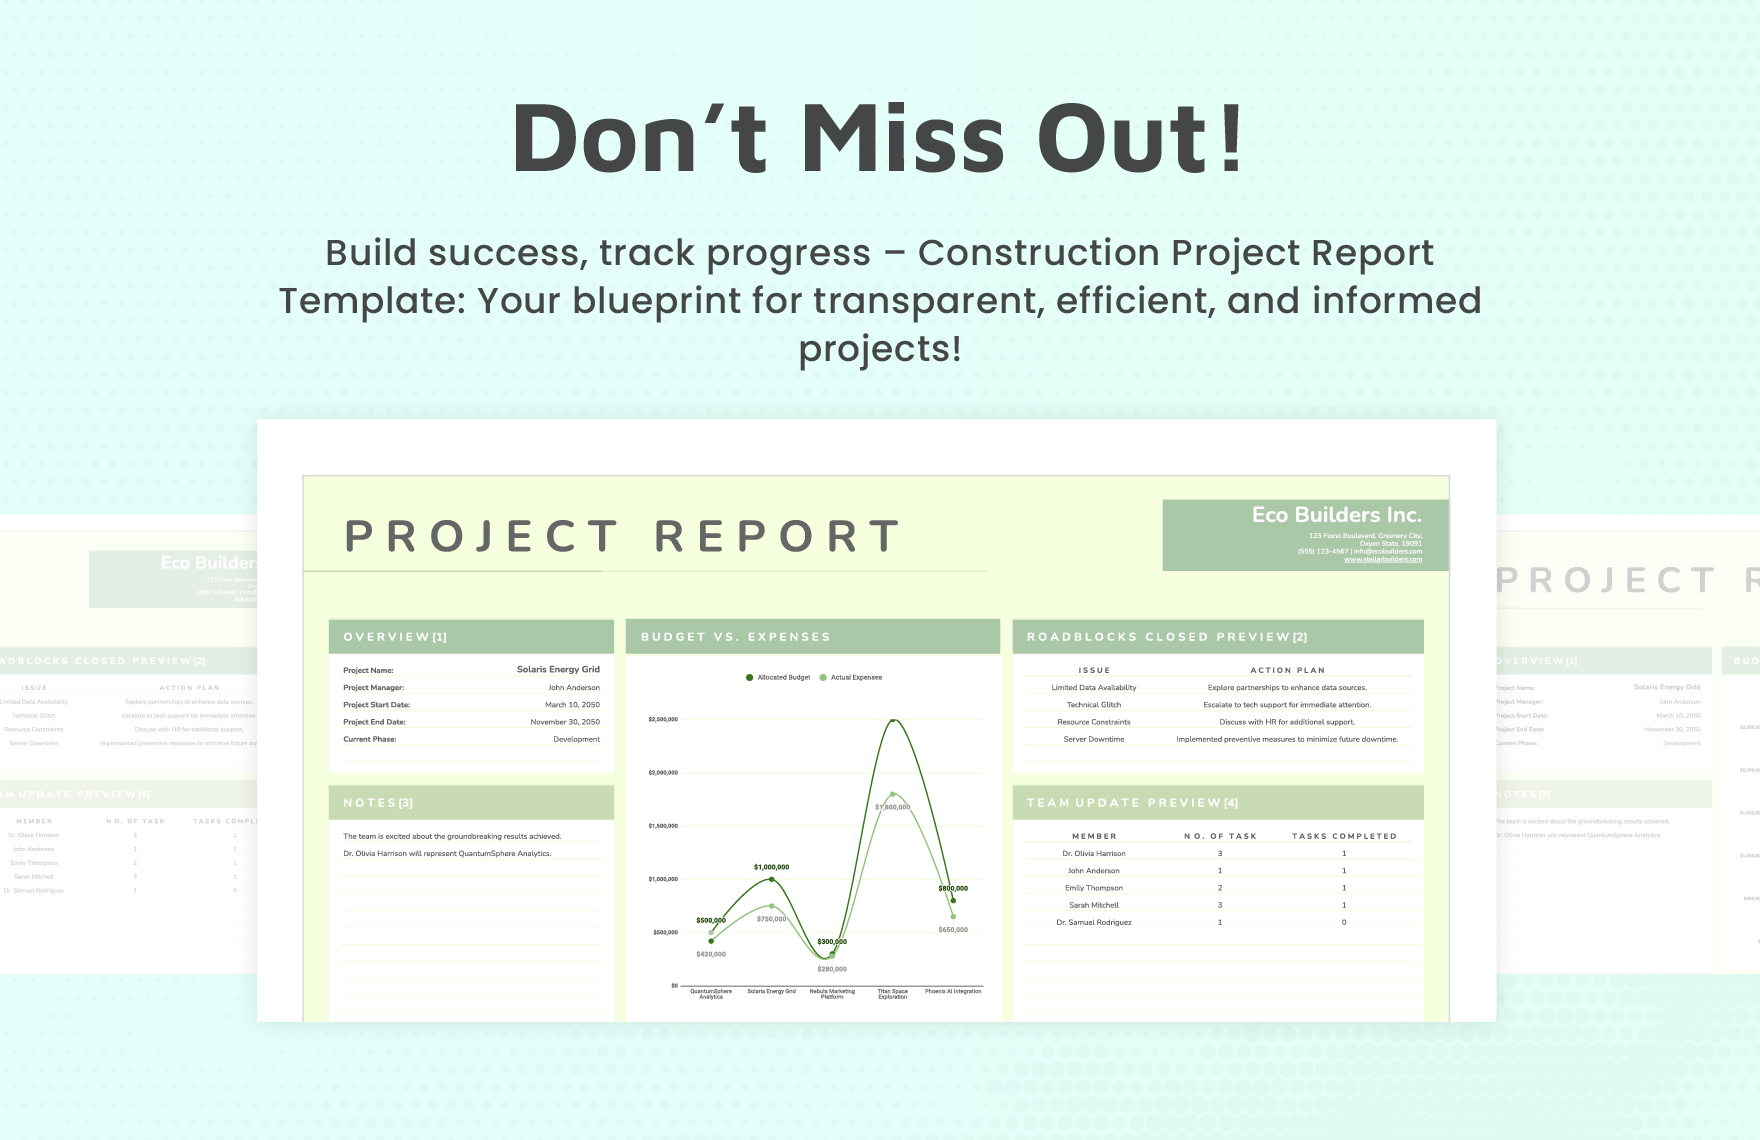 Construction Project Report Template